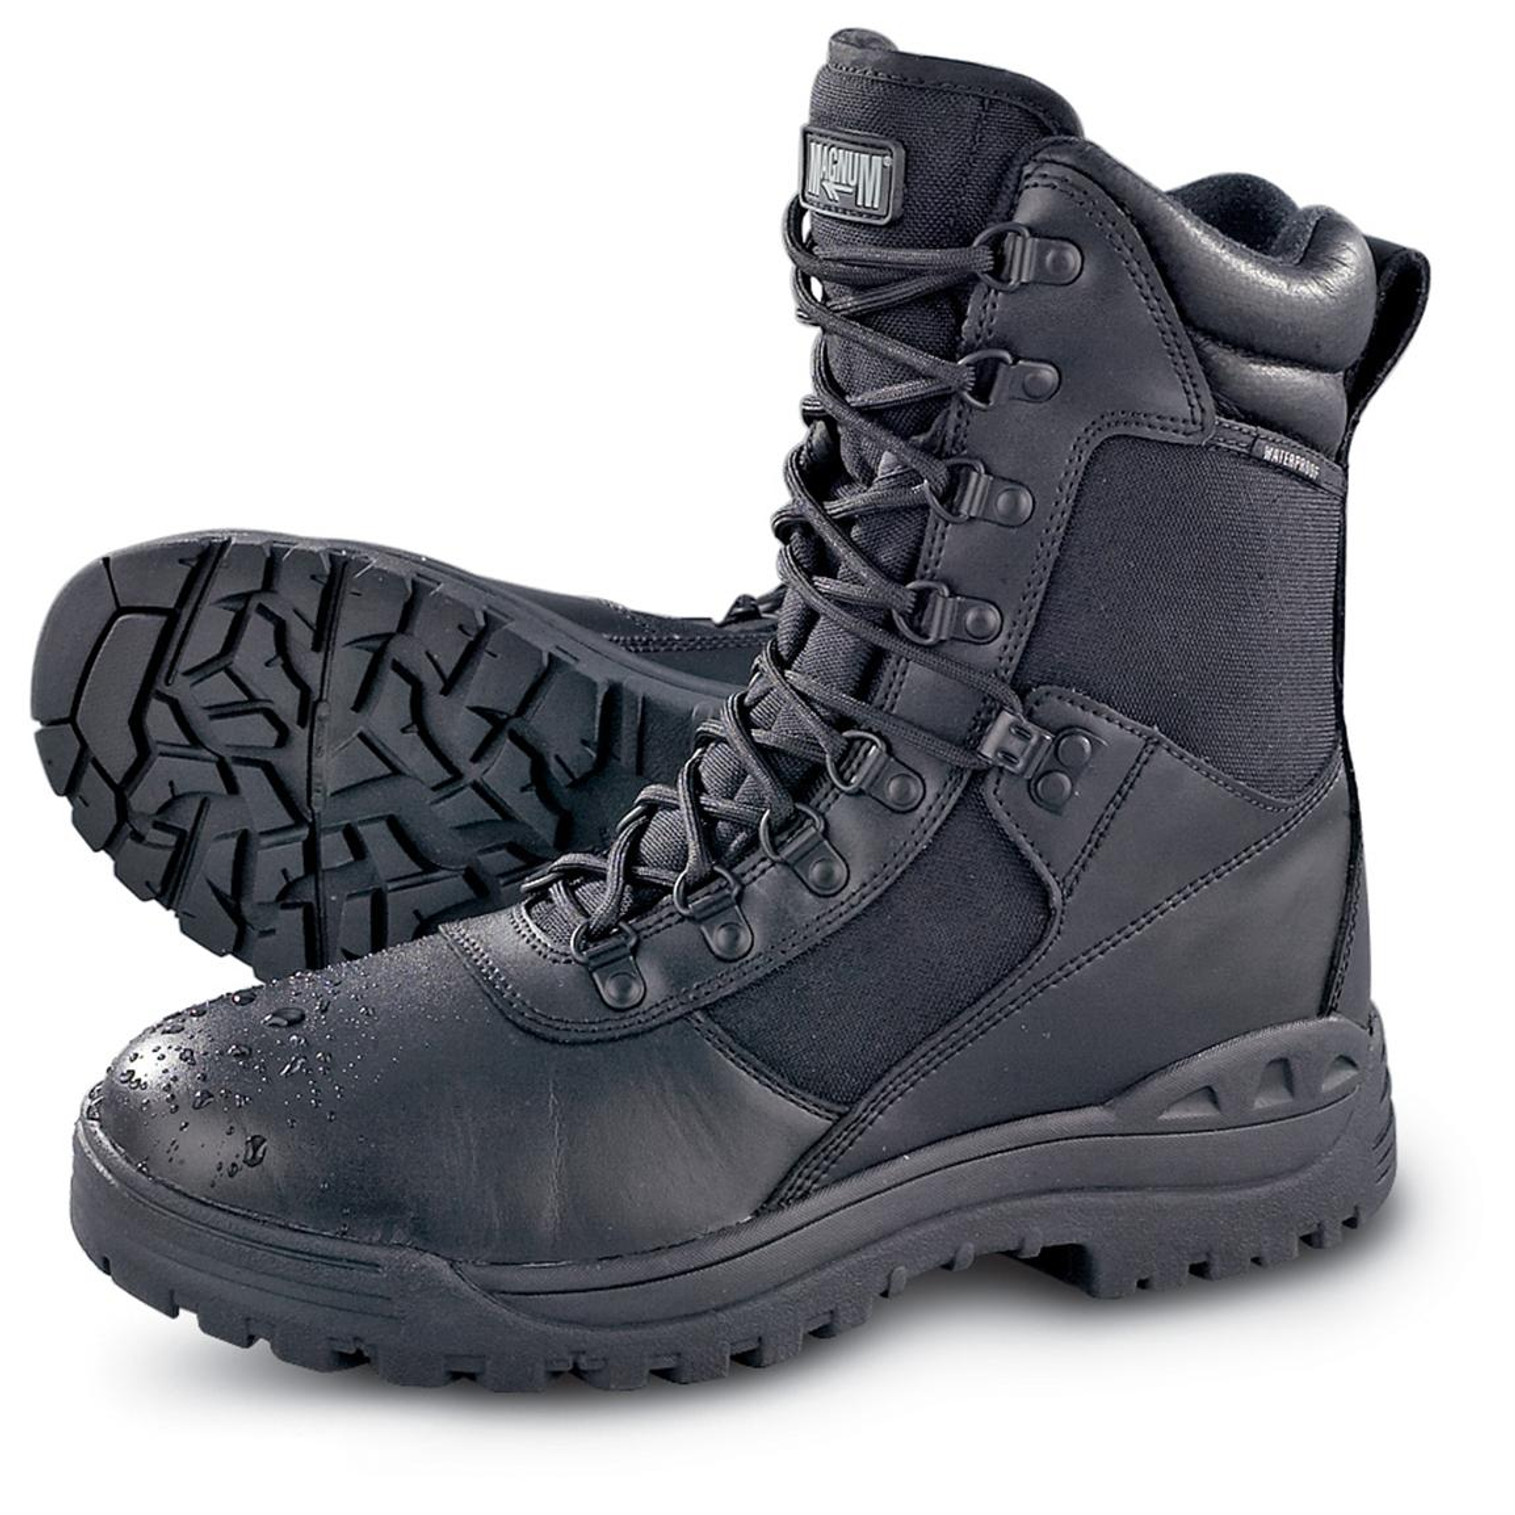 Magnum Storm  8.0 Insulated/Waterproof Duty Boot